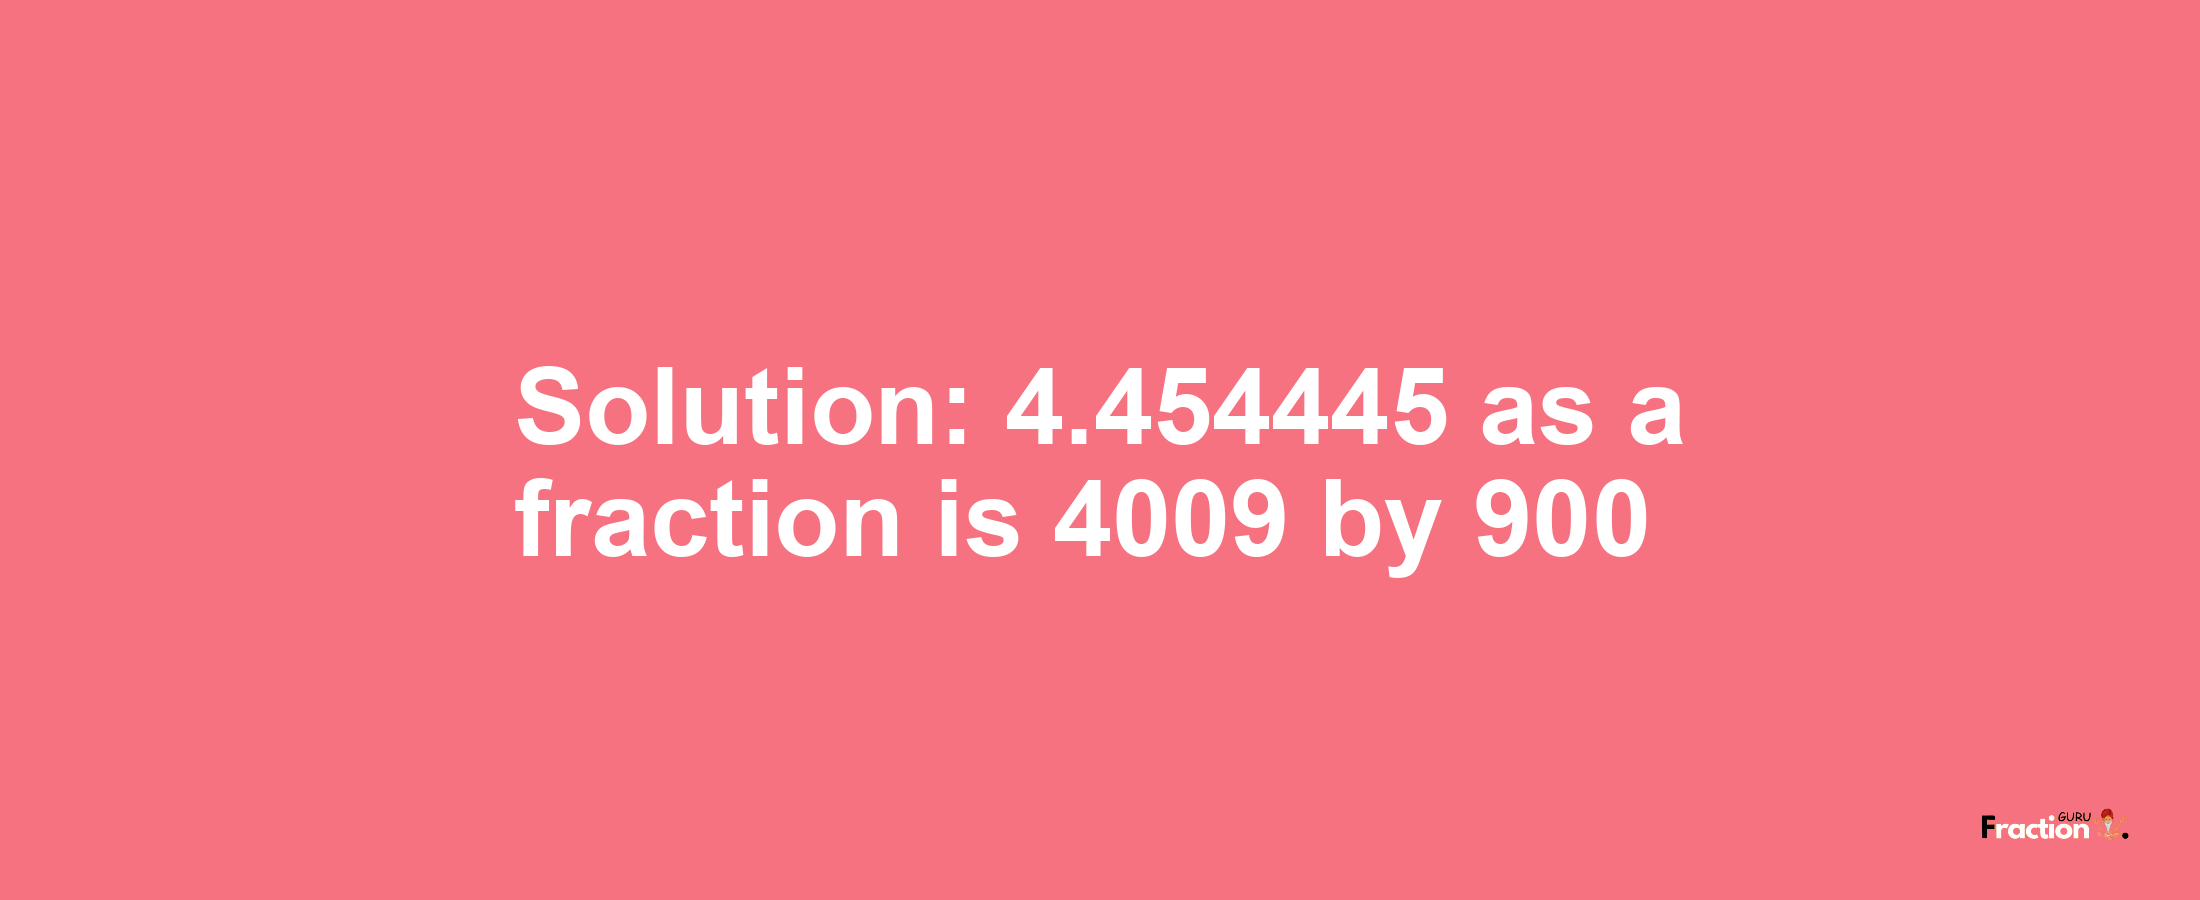 Solution:4.454445 as a fraction is 4009/900